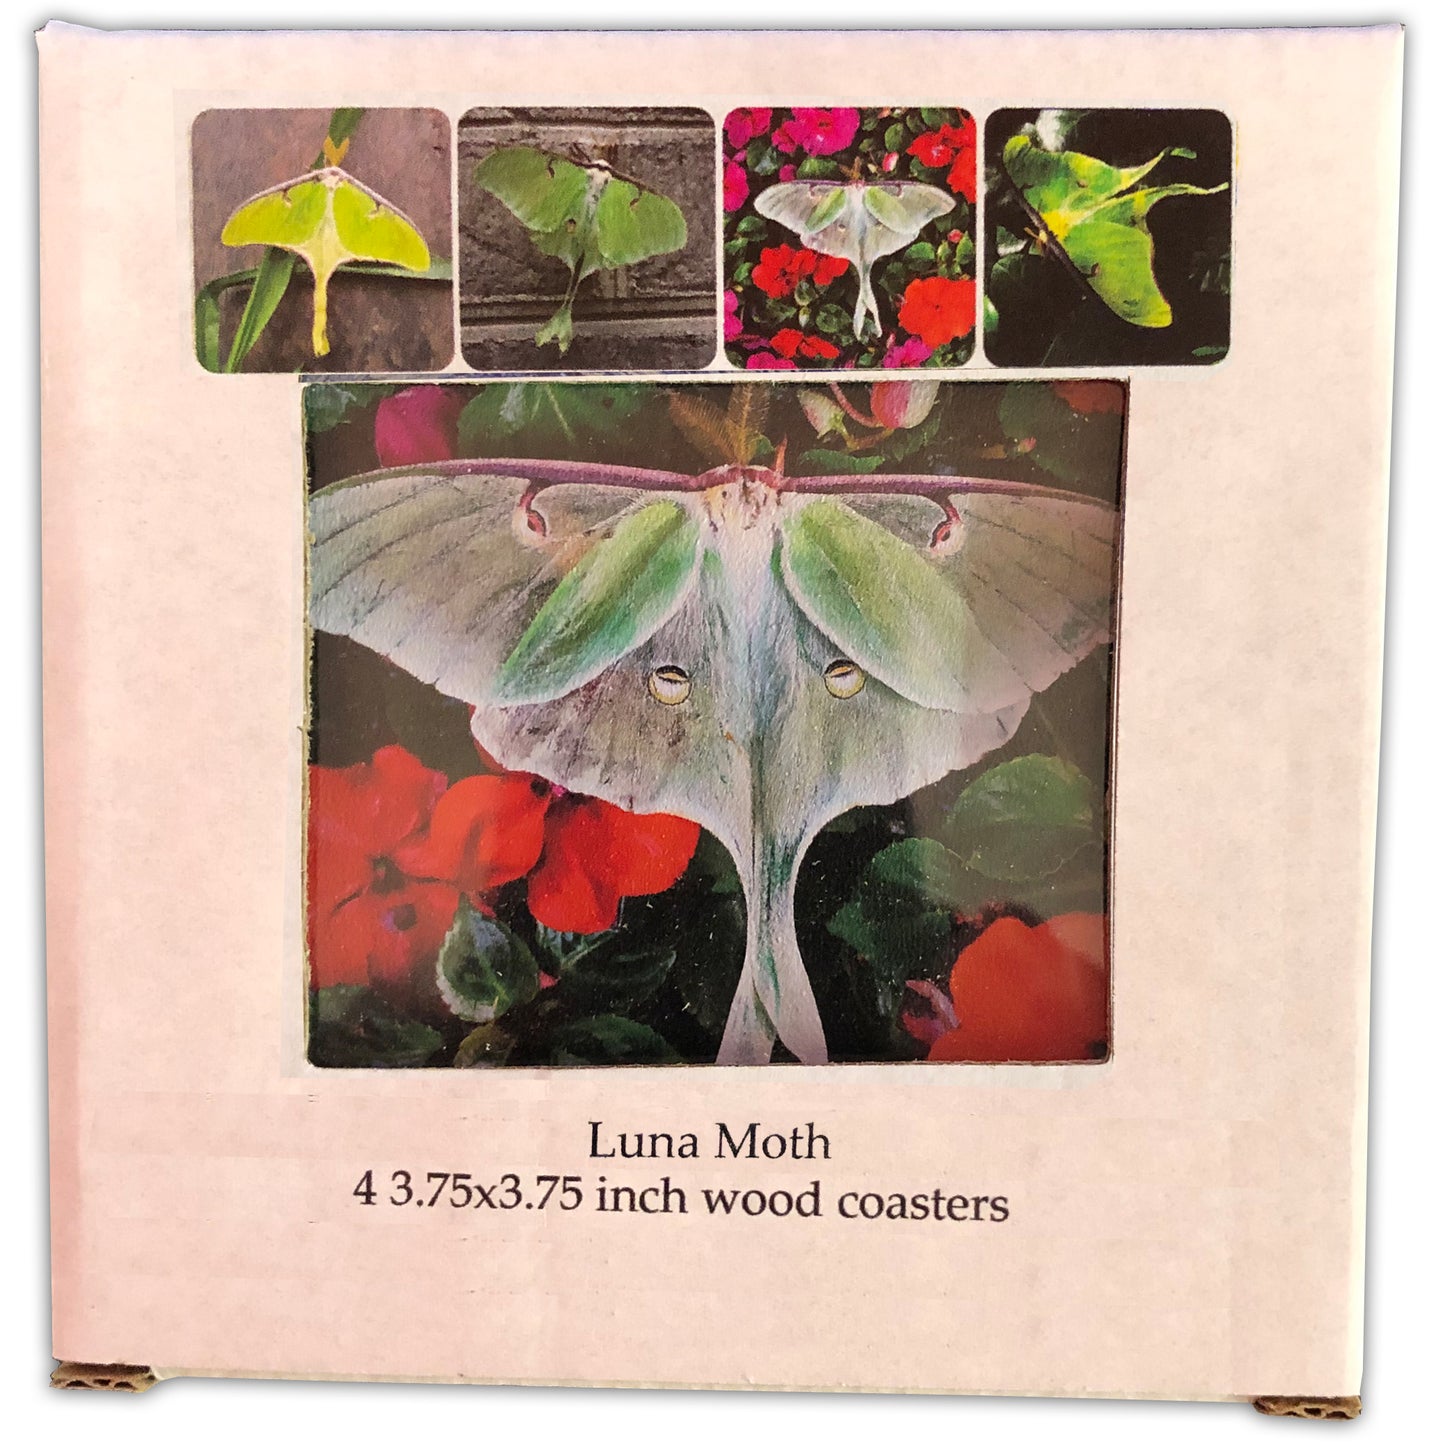 Luna Moth  Wood Coaster Set, 3.75x3.75, set of 4, made in USA by d'ears